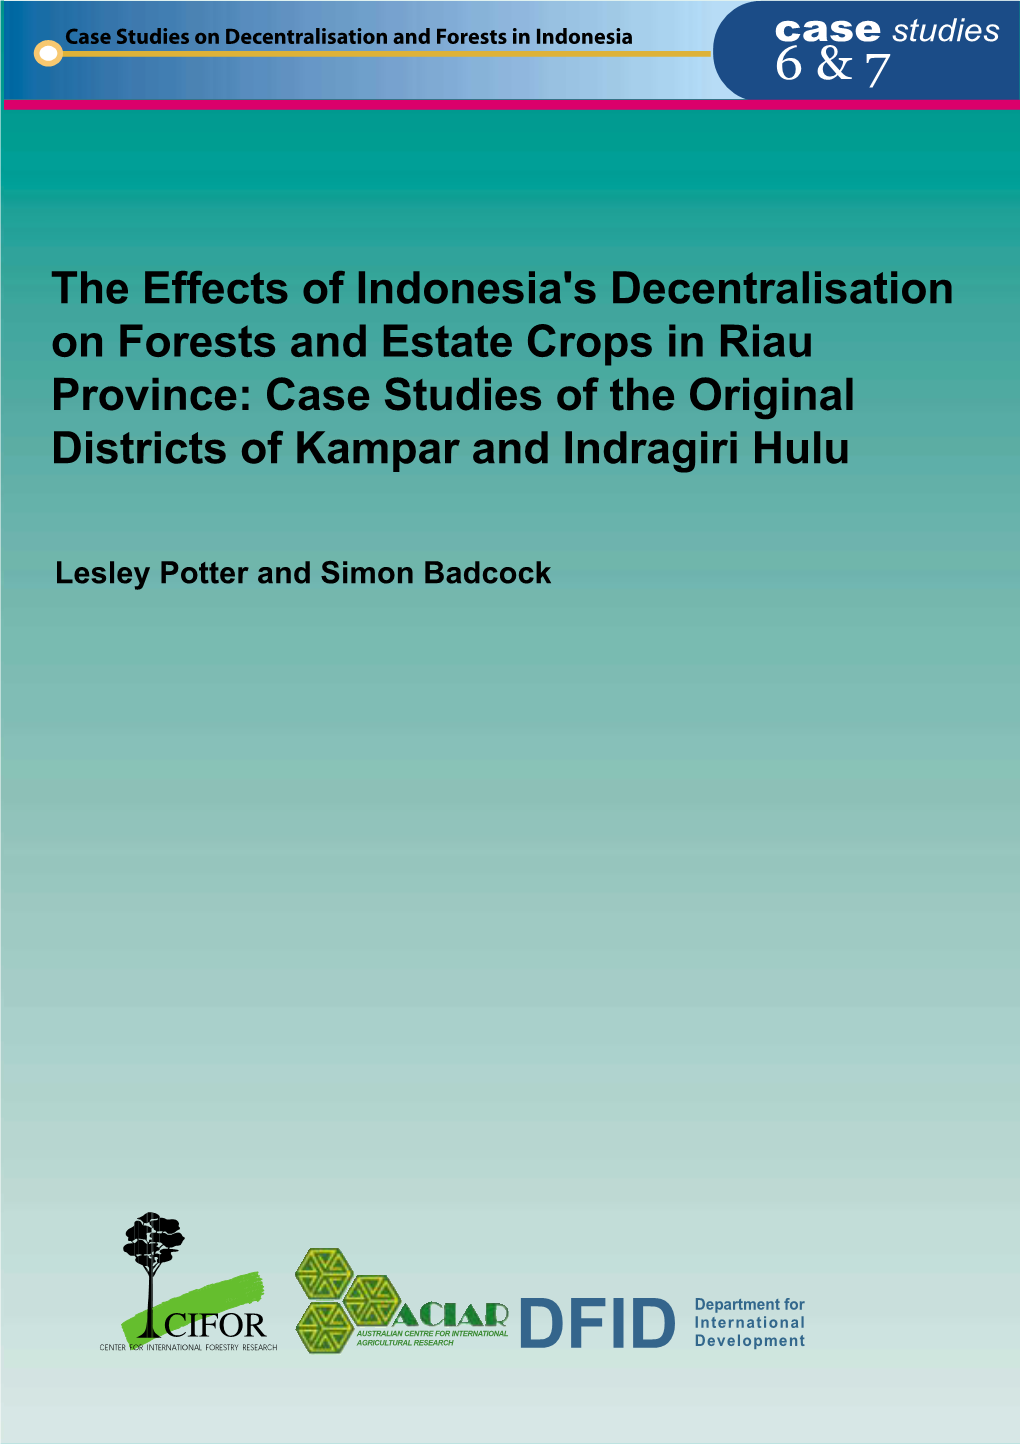 The Effects of Indonesia's Decentralisation on Forests and Estate Crops: Case Study of Riau Province, the Original Districts